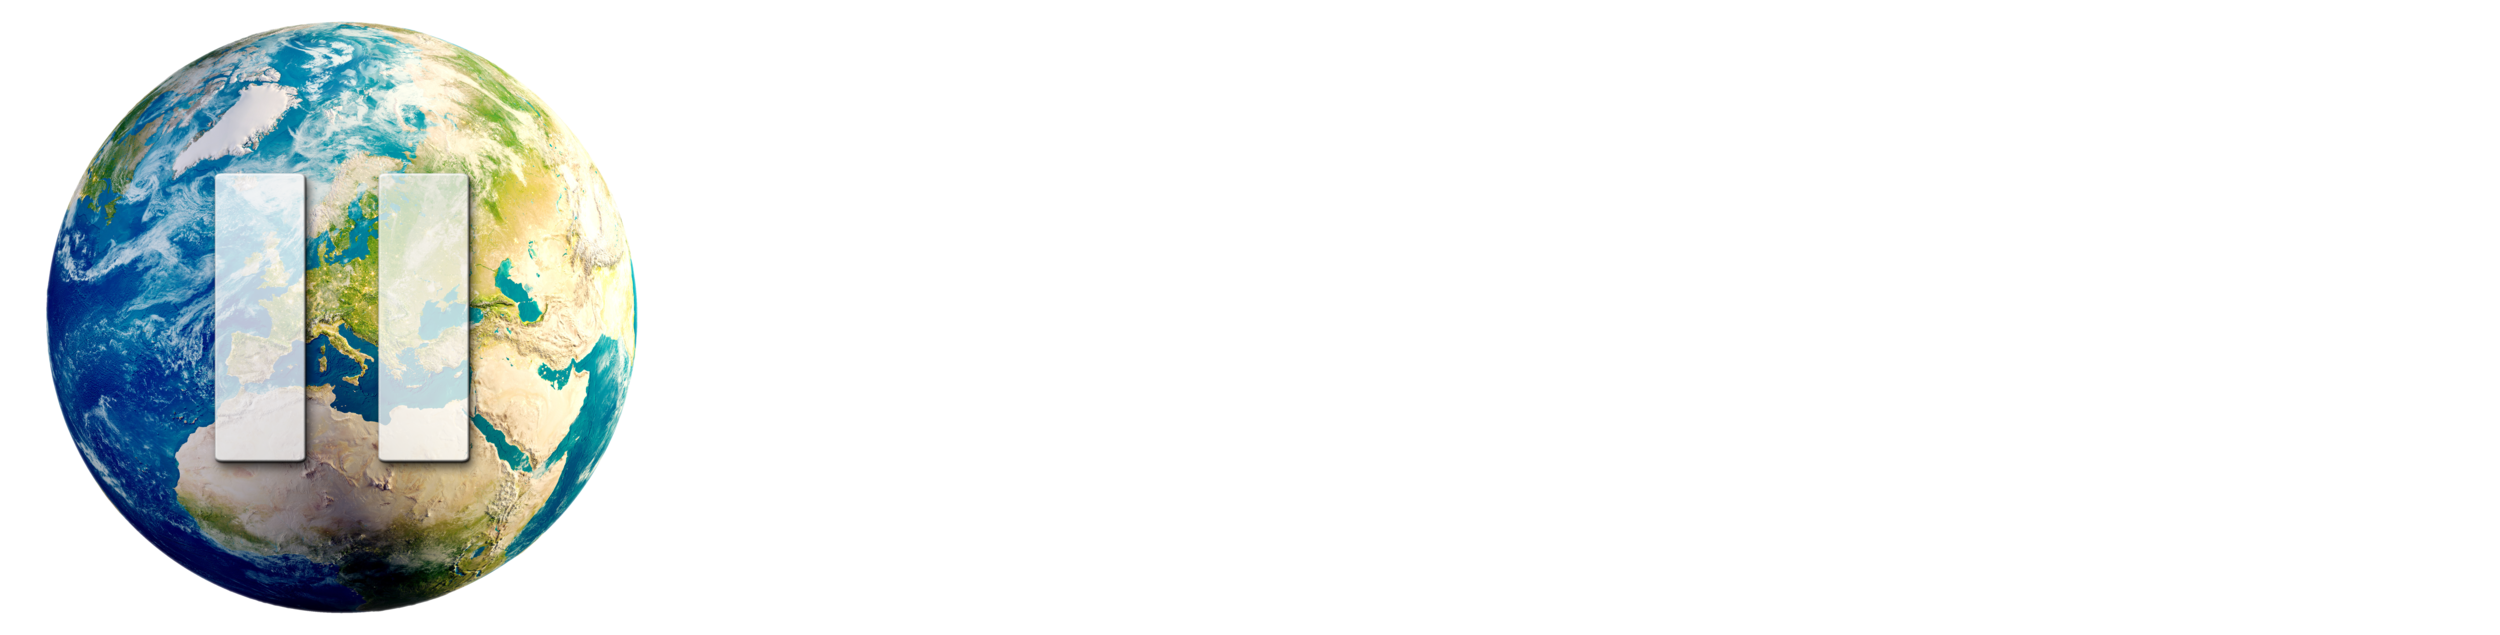 Day of Pause